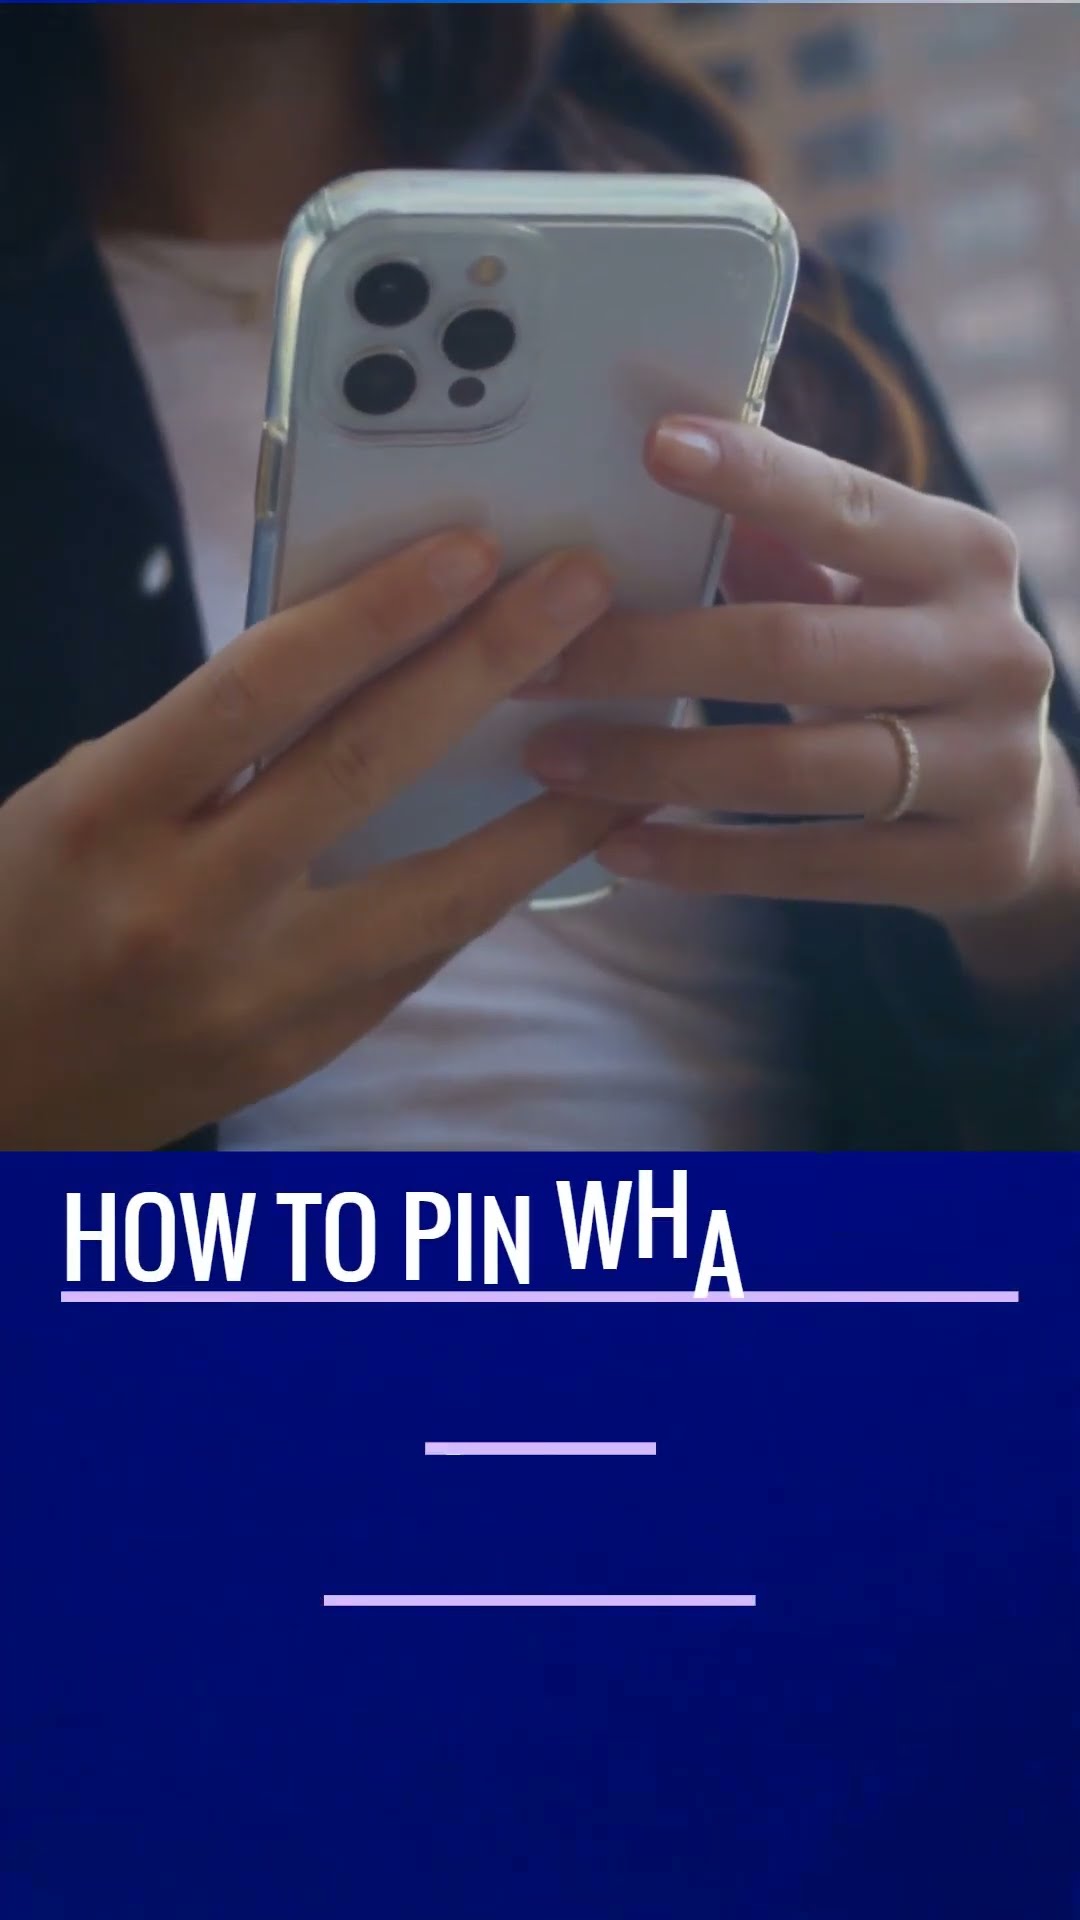 How to pin a chat on WhatsApp (Android and iPhone)